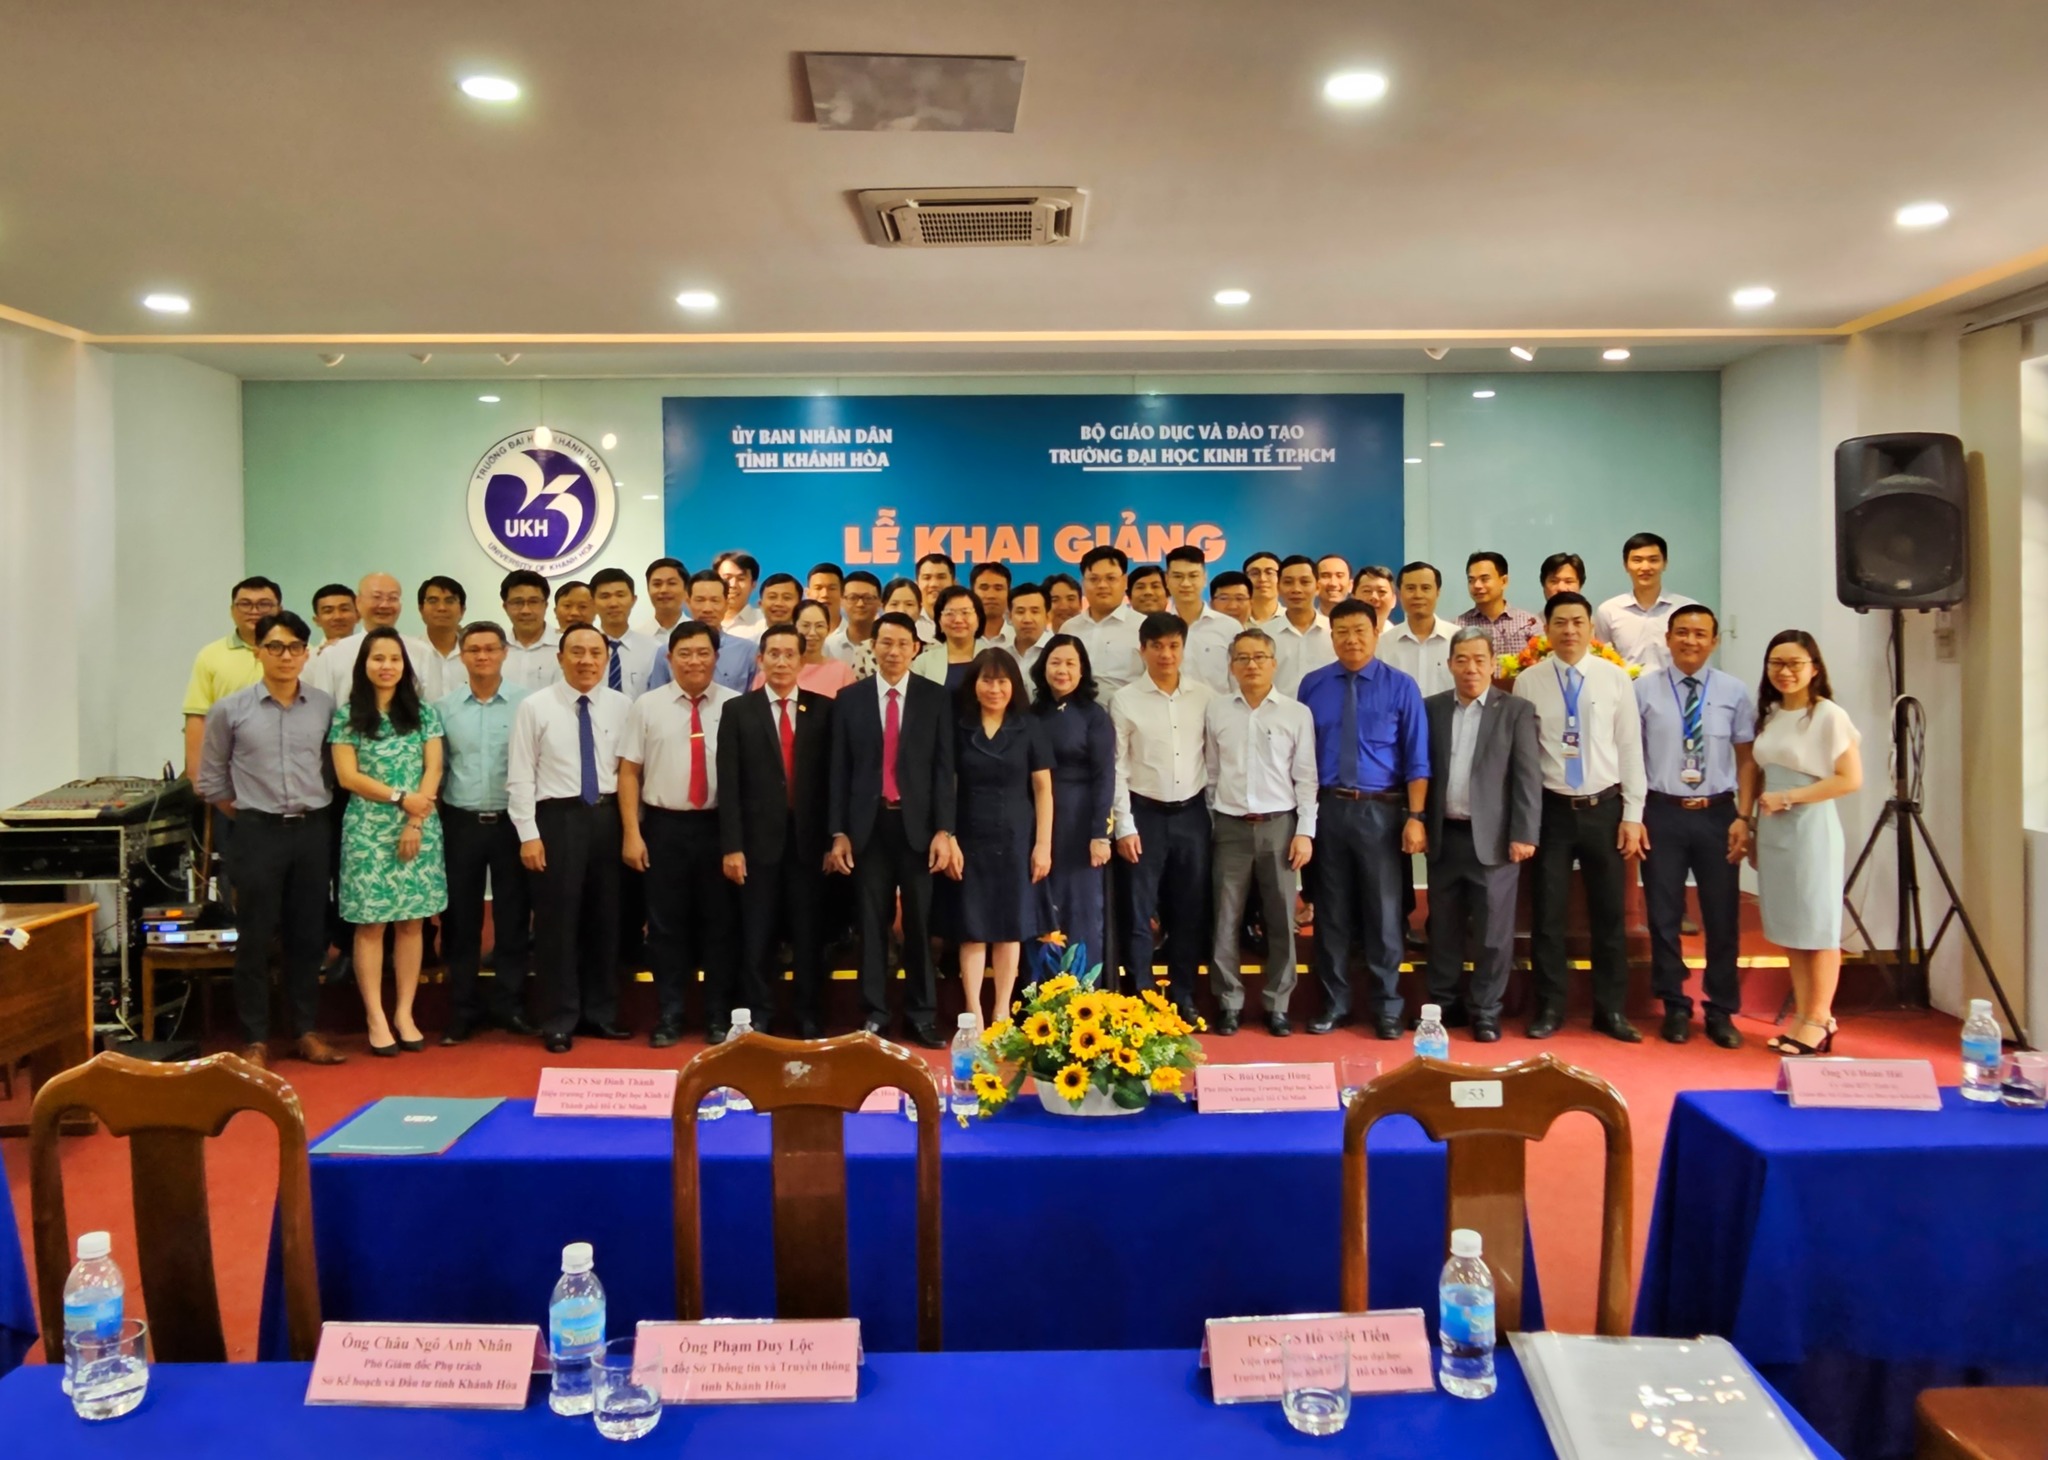 CONVOCATION CEREMONY OF MASTER OF SMART CITY AND INNOVATION MANAGEMENT FOR KHANH HOA PROVINCE